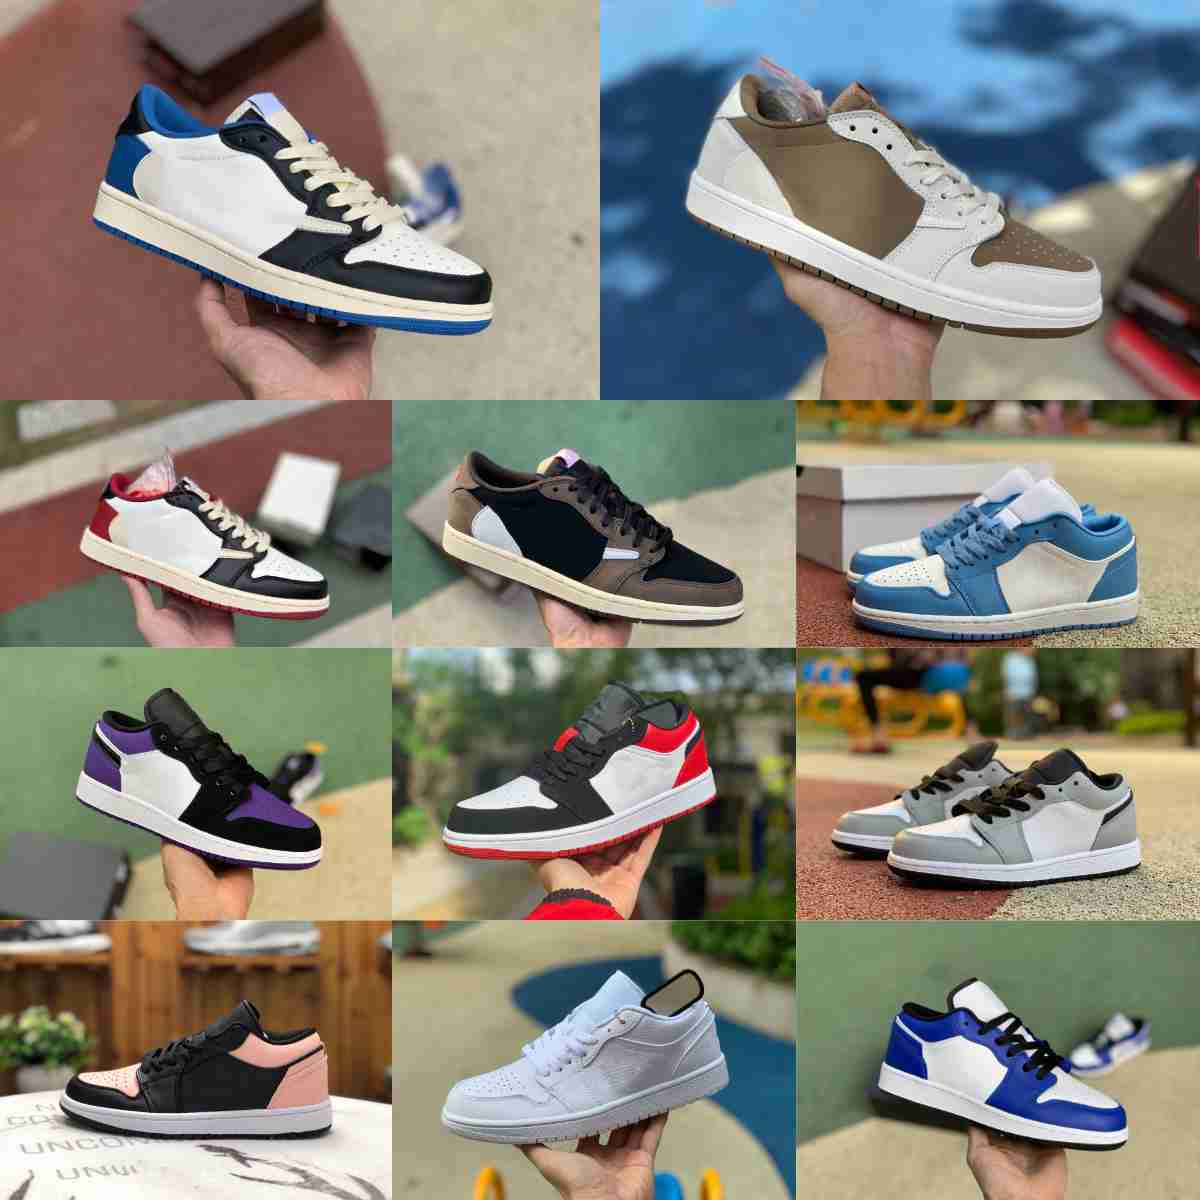 

2023 Fragment TS Jumpman X 1 1S Low Basketball Shoes Court Purple Black Shadow Panda Emerald Crimson White Brown Red Gold Grey Toe UNC Tint Designer Sports Sneakers S17, Please contact us